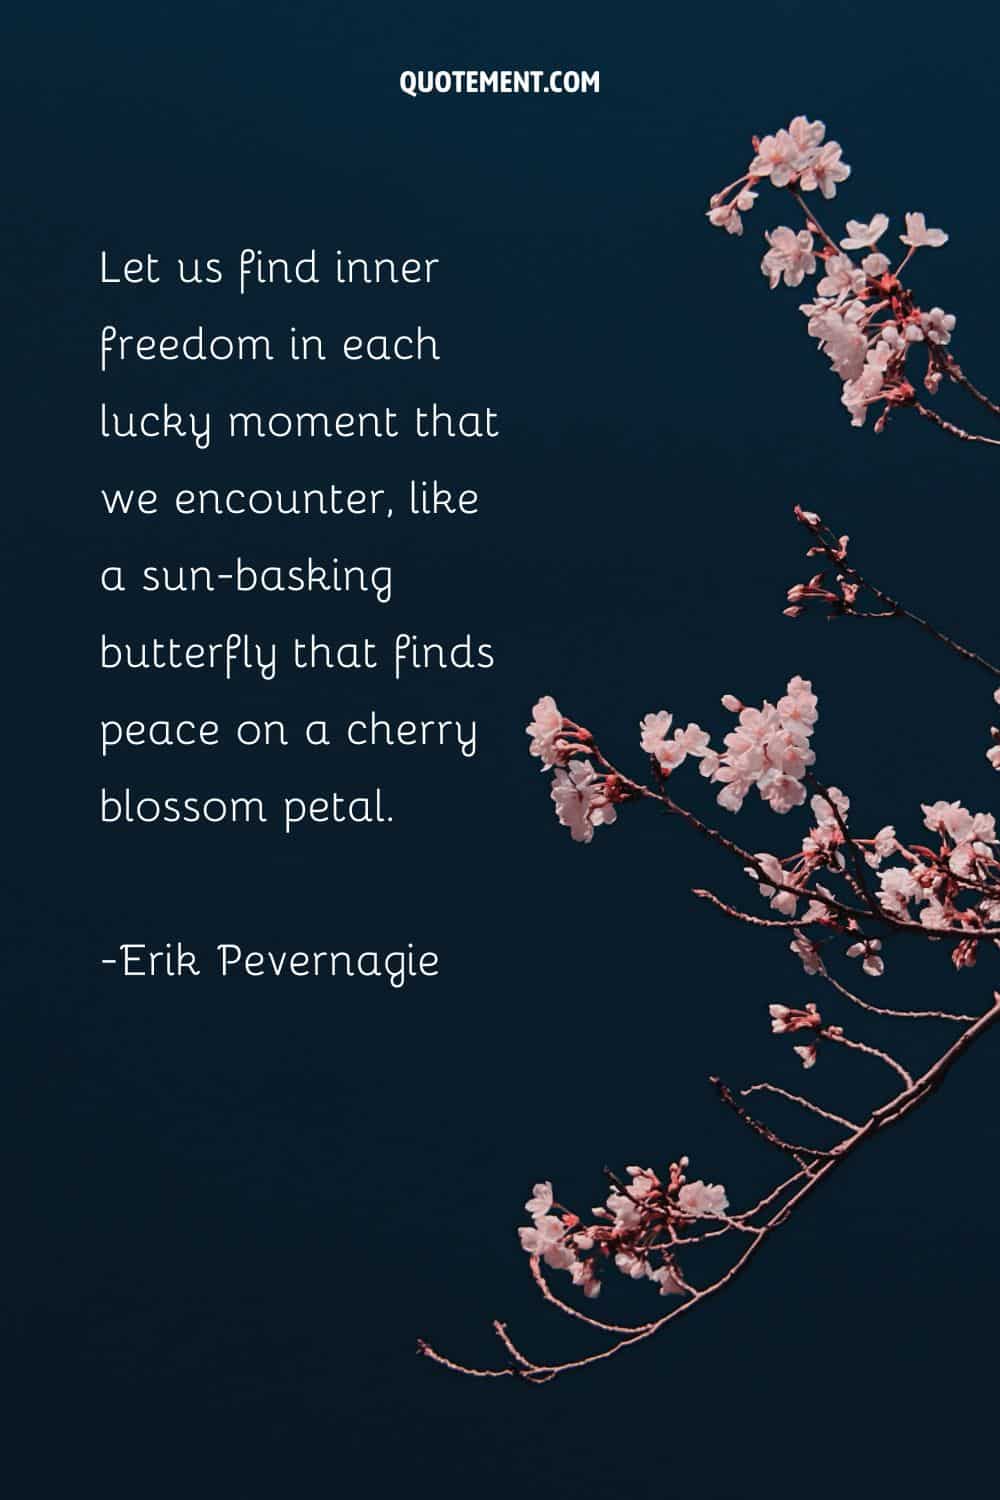 Cherry blossom quote and sakura branches in the background.